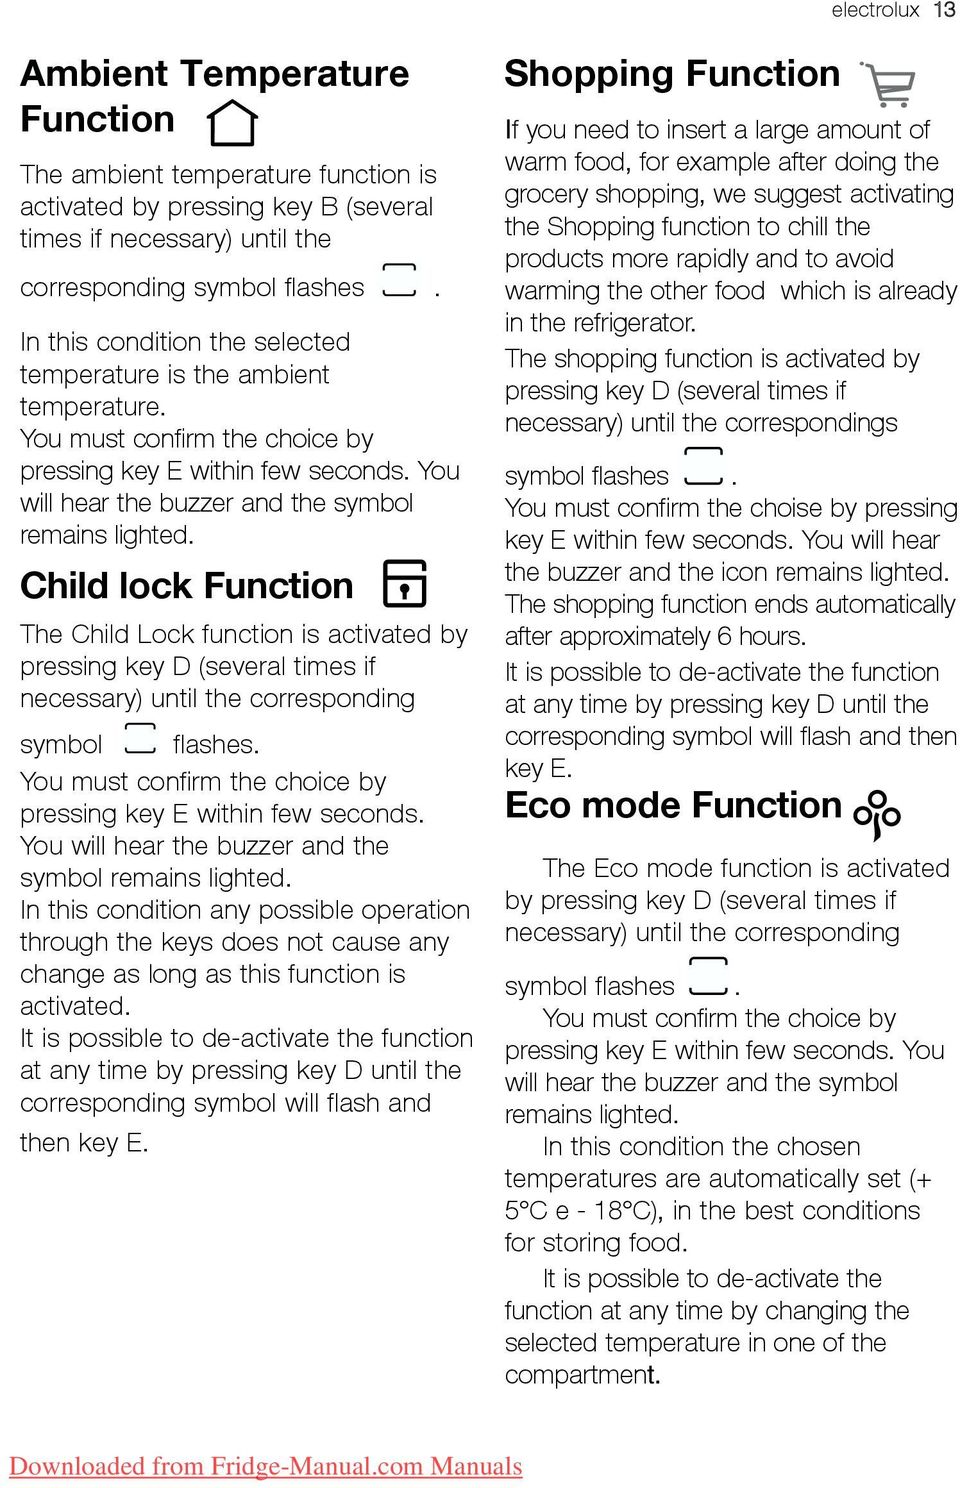 Child lock Function The Child Lock function is activated by pressing key D (several times if necessary) until the corresponding symbol flashes.